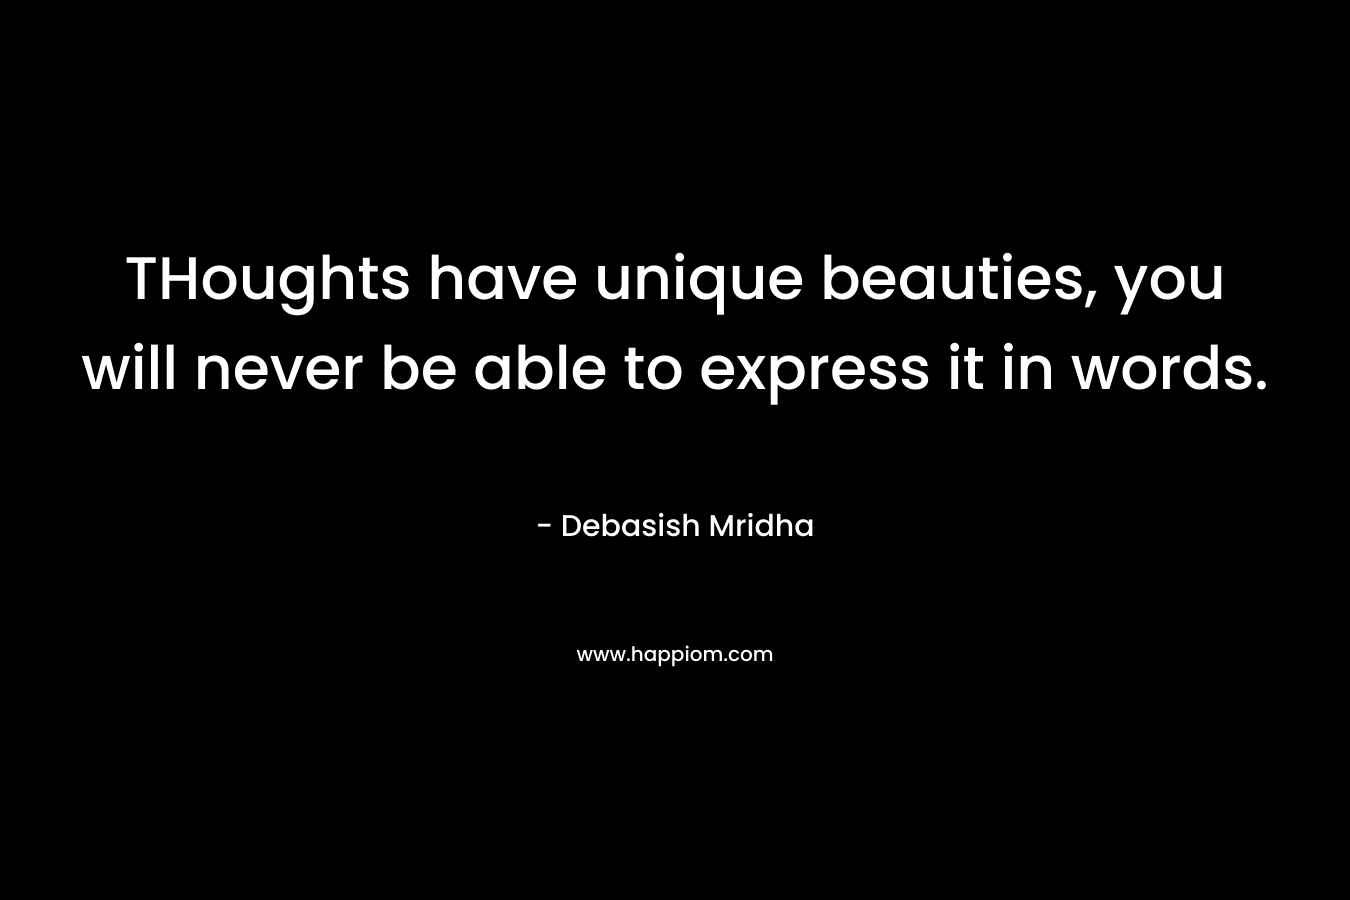 THoughts have unique beauties, you will never be able to express it in words.